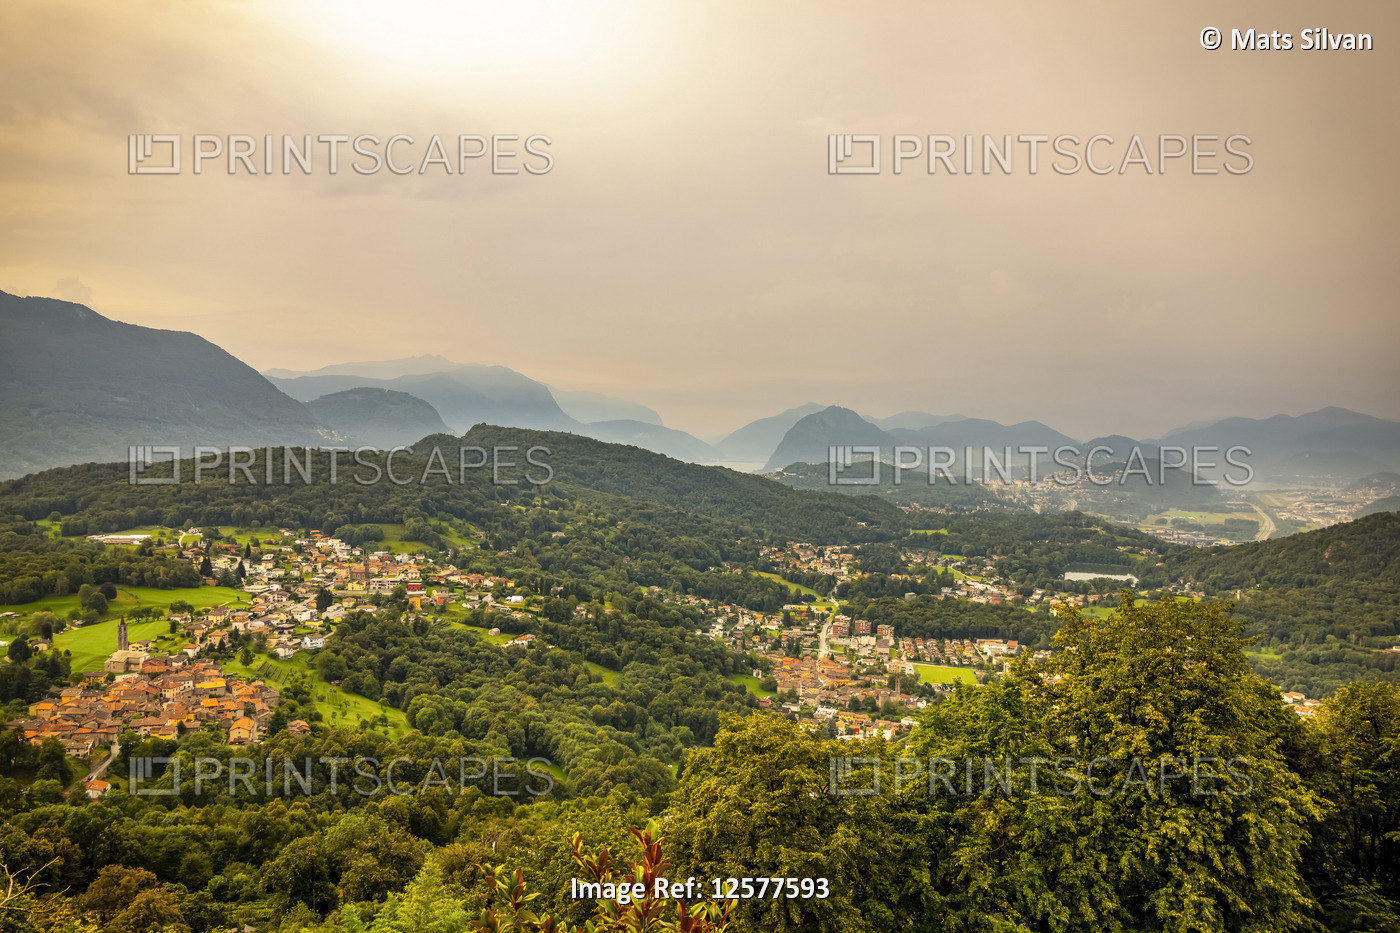 Sunlight glowing through the overcast sky over the rolling hills of Lugano; ...